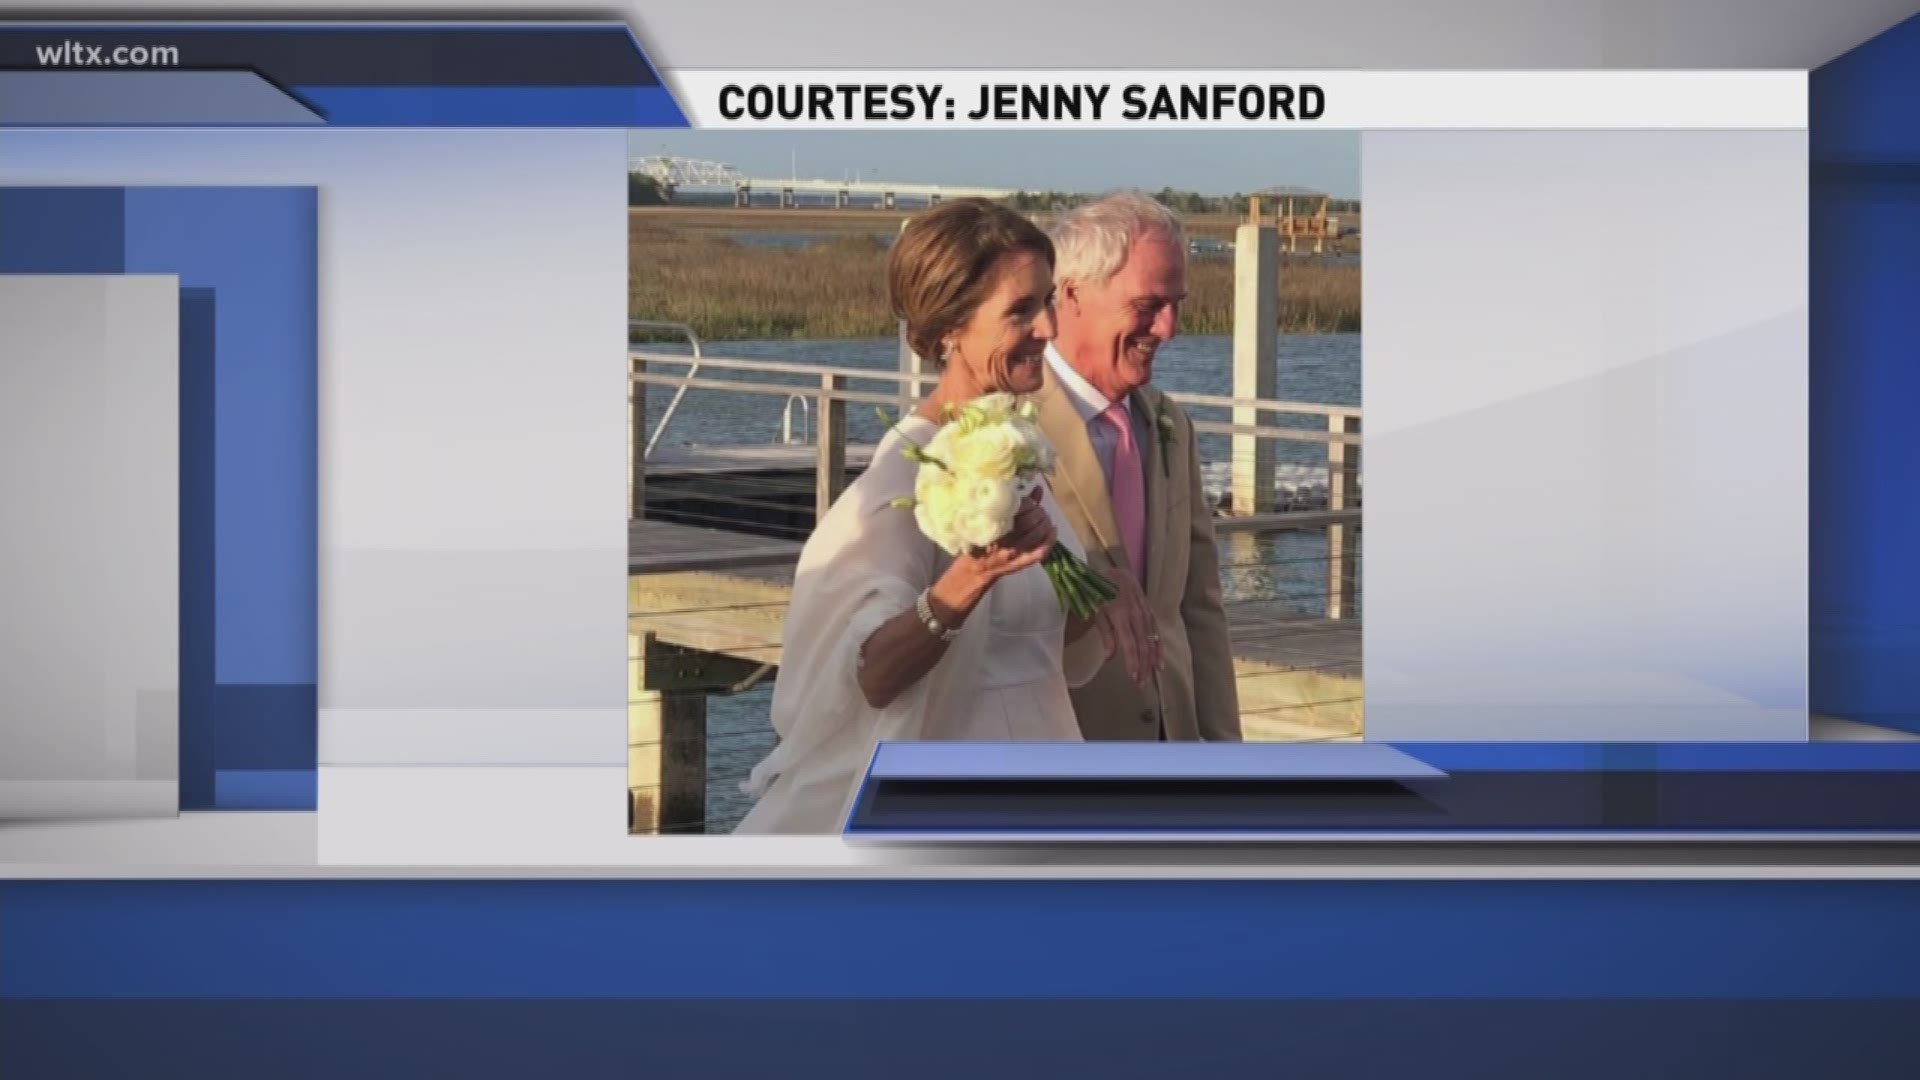 The former First Lady of South Carolina has tied the knot with her boyfriend of the last several years.